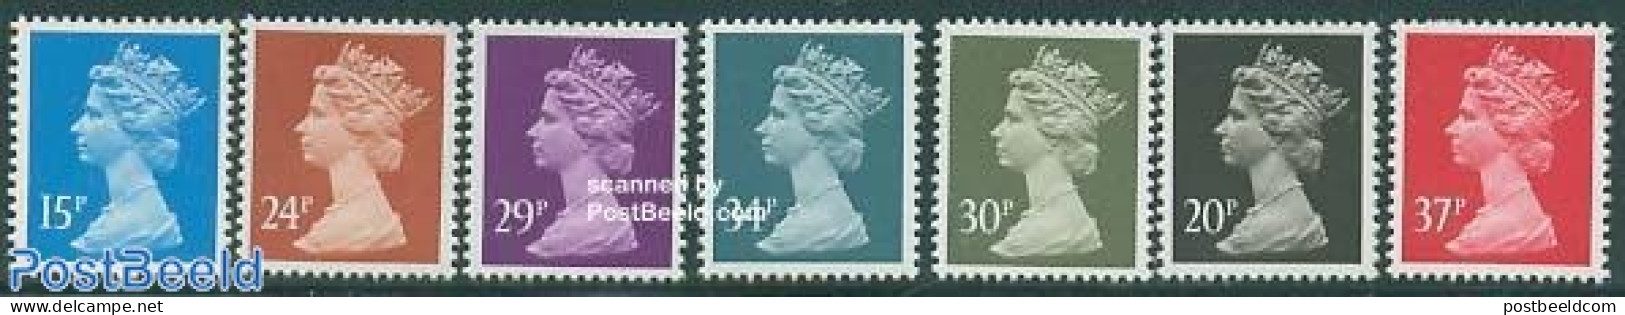 Great Britain 1989 Definitives 7v, Mint NH - Neufs